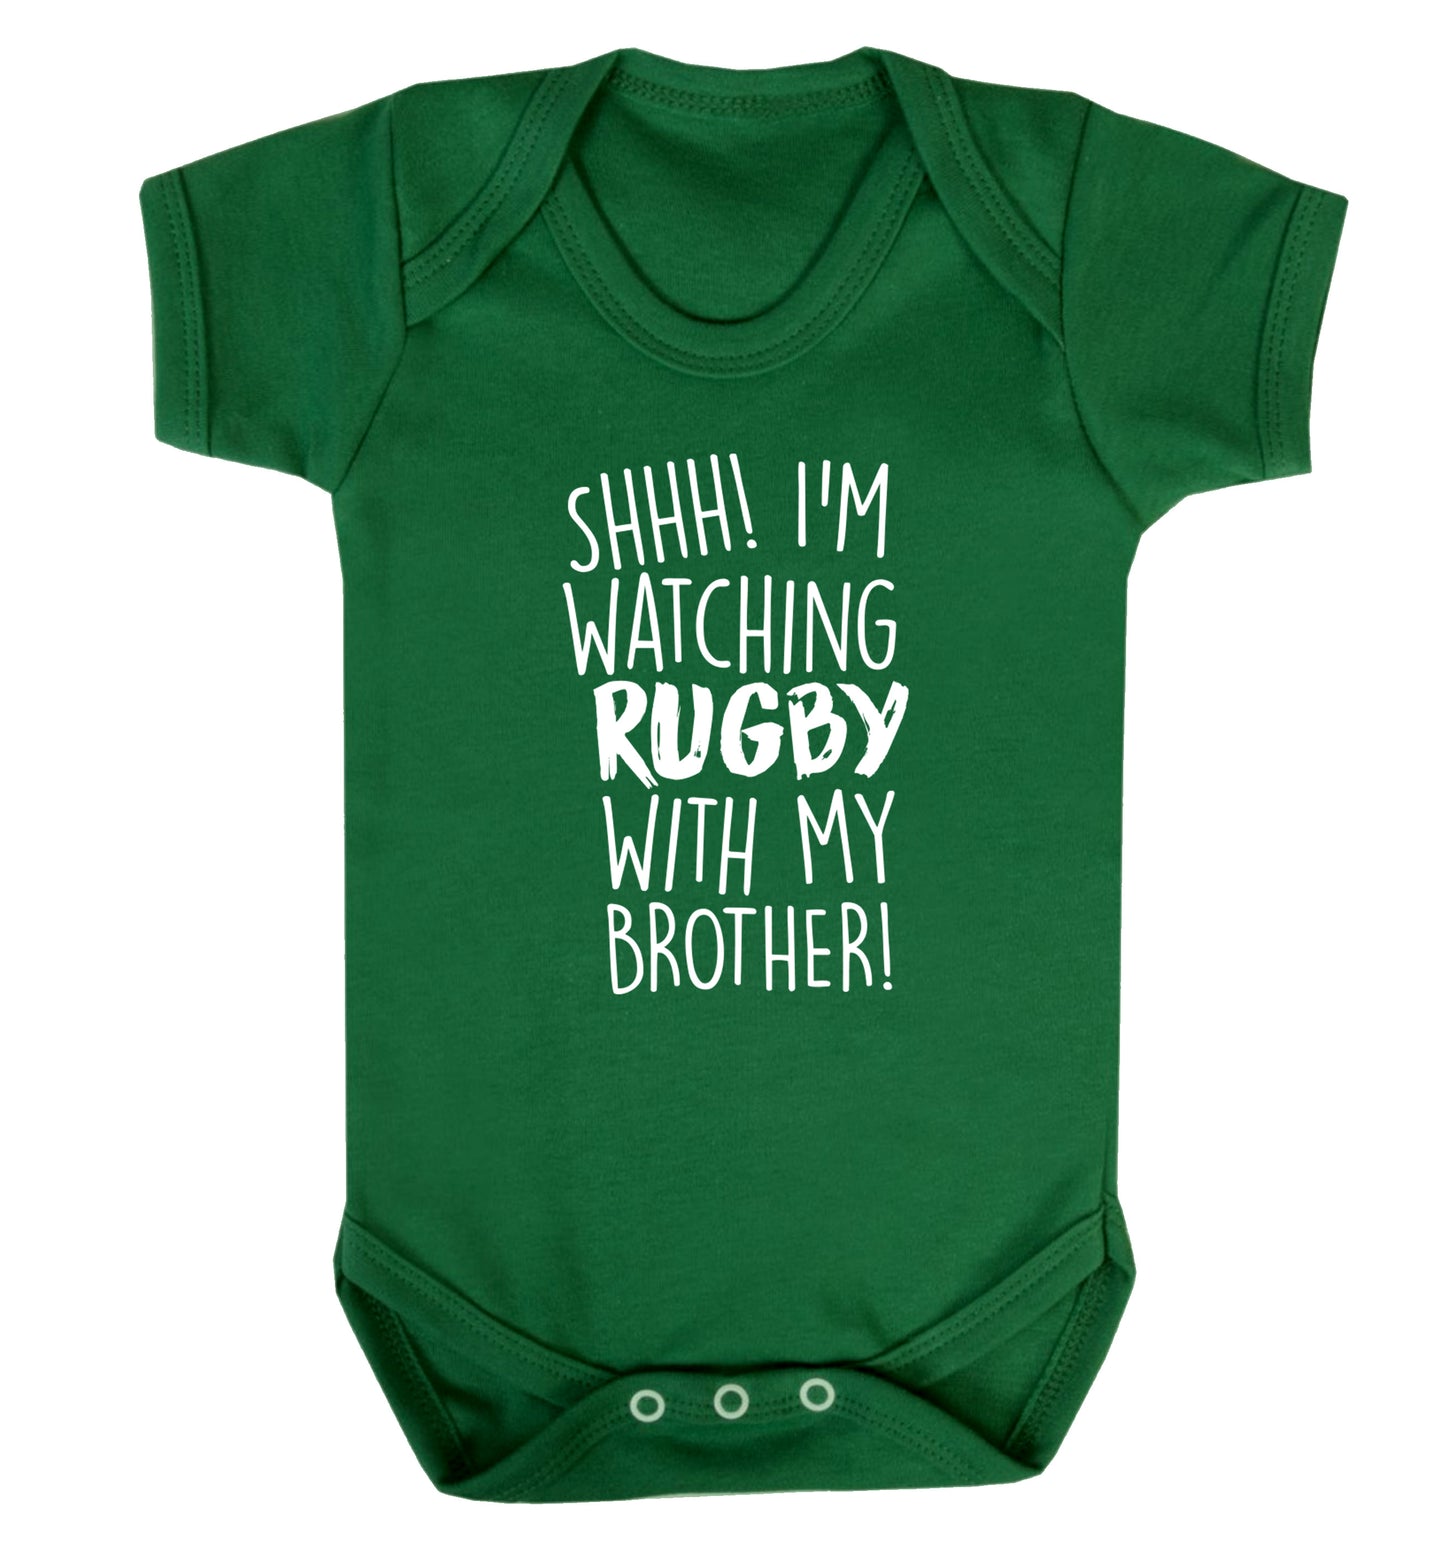 Shh... I'm watching rugby with my brother Baby Vest green 18-24 months